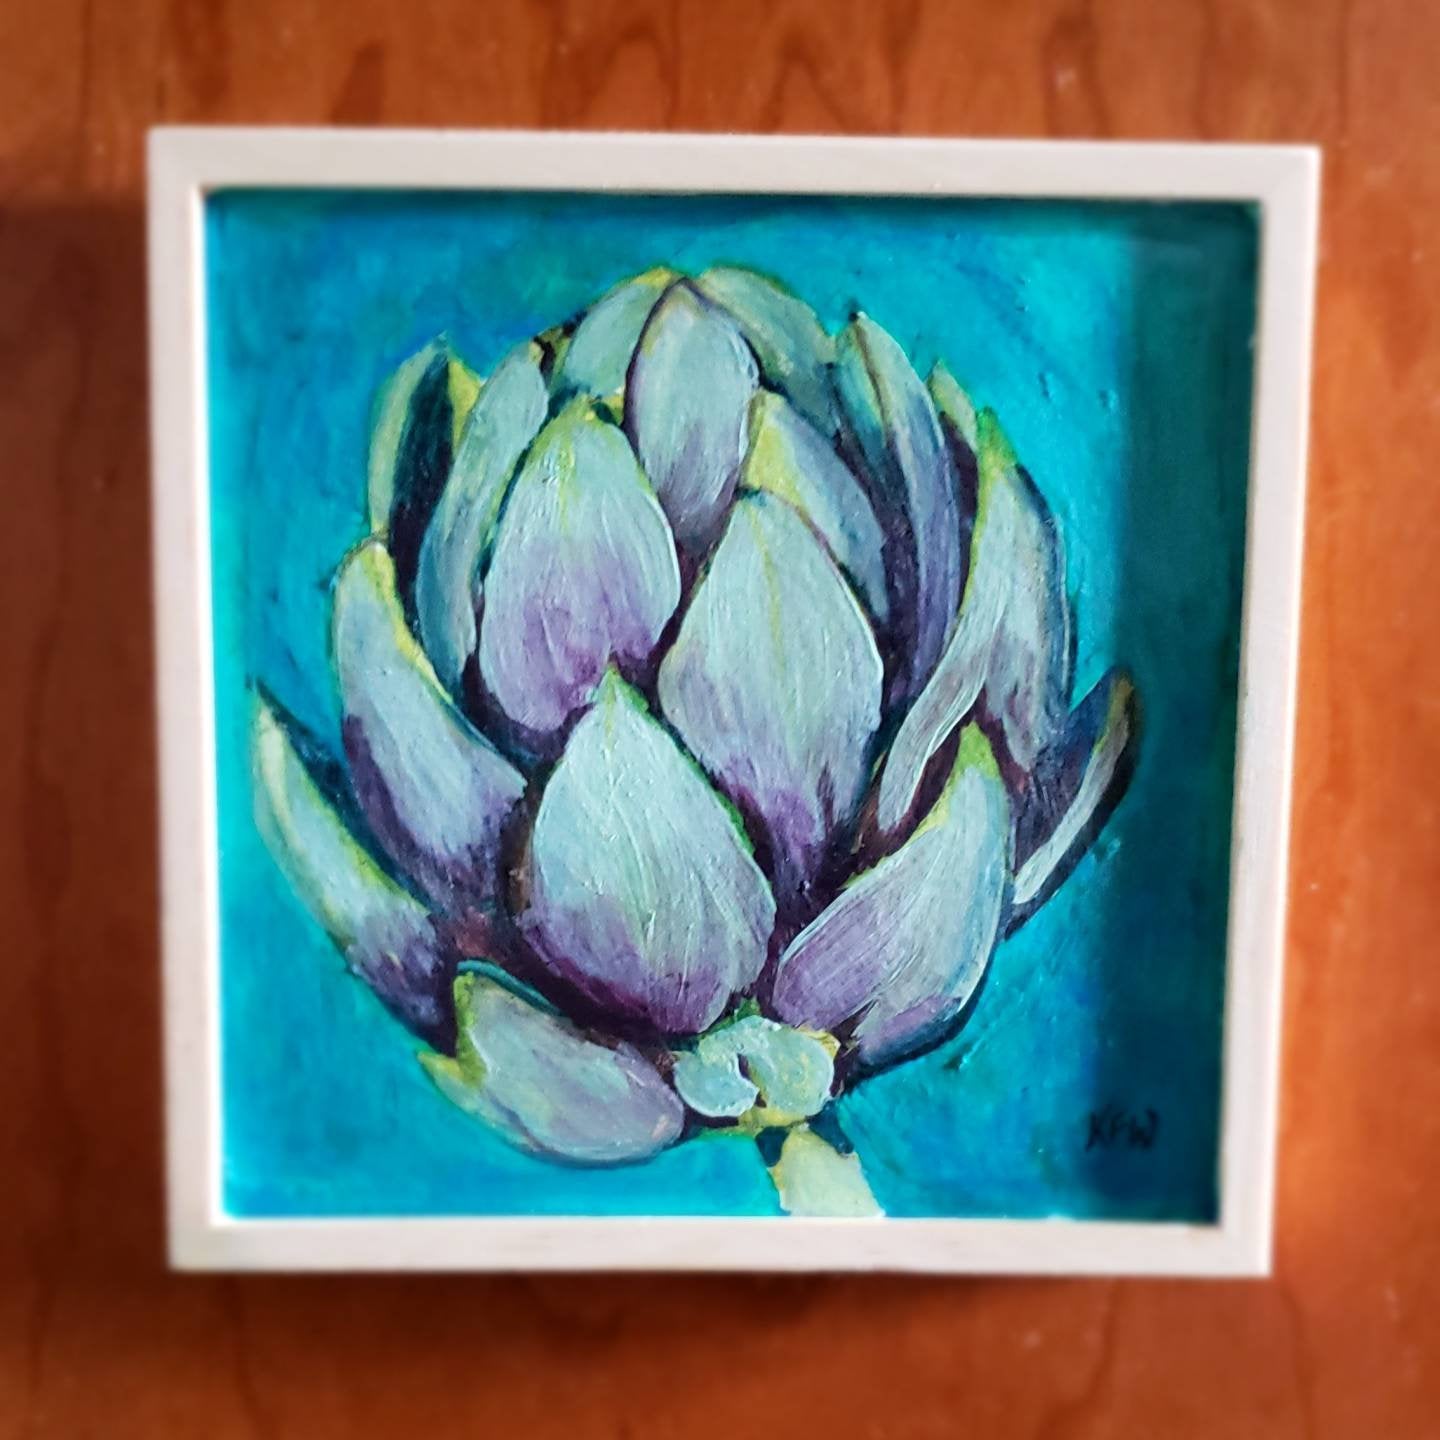 Artichoke painting, tiny, 6x6 inches, framed panel